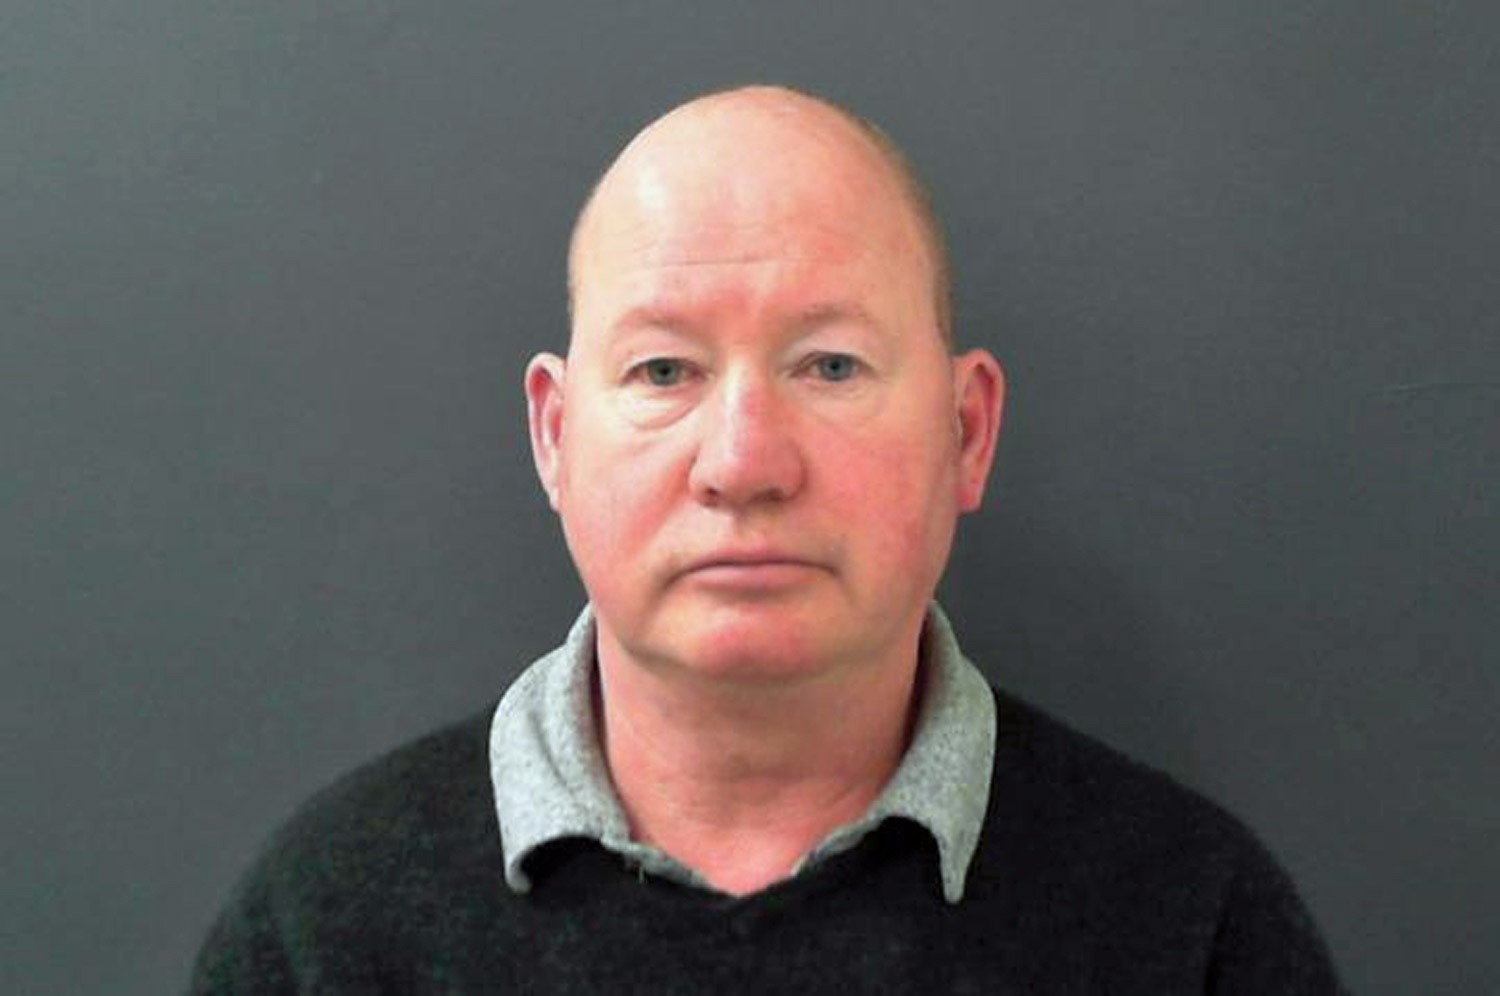 David William Connor of Green Lane, Wetherby, who pleaded guilty to two charges of fraud at an earlier hearing, befriended the 88-year-old widower and over a period of 16 months defrauded him out of £18,450